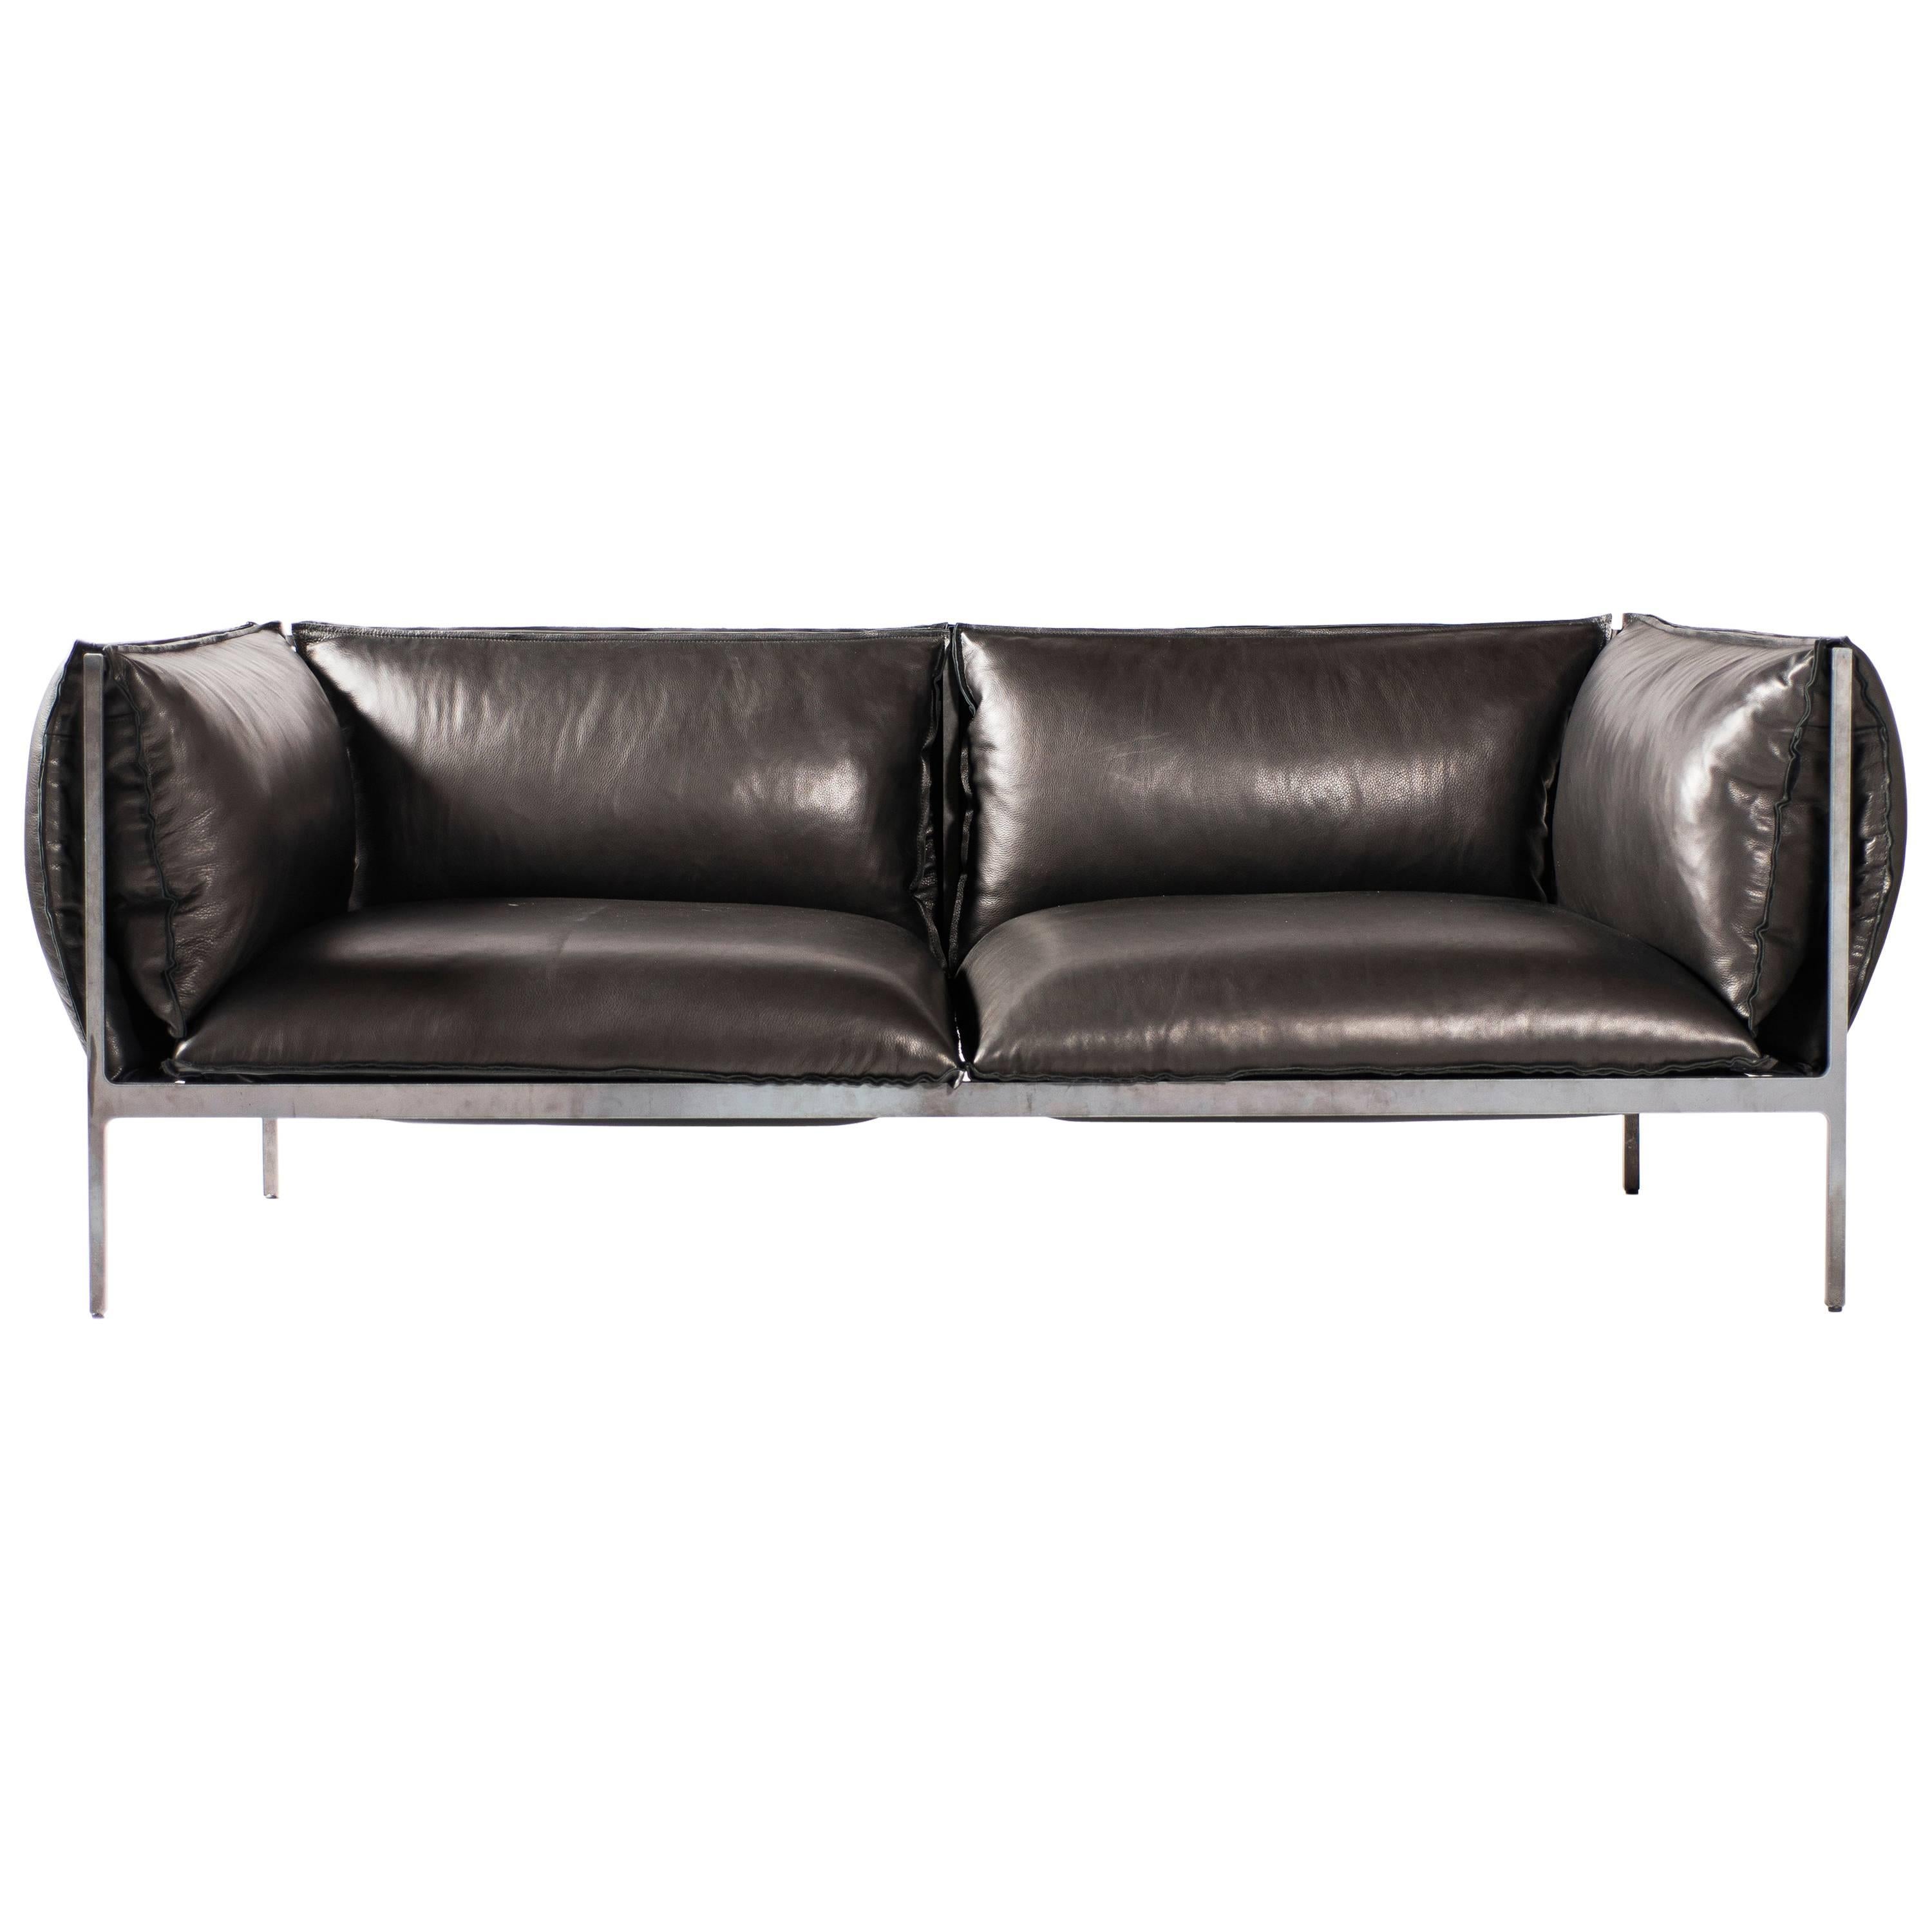 Double-Seat Sofa in Milled Black Leather and Oiled Laser-Cut Steel